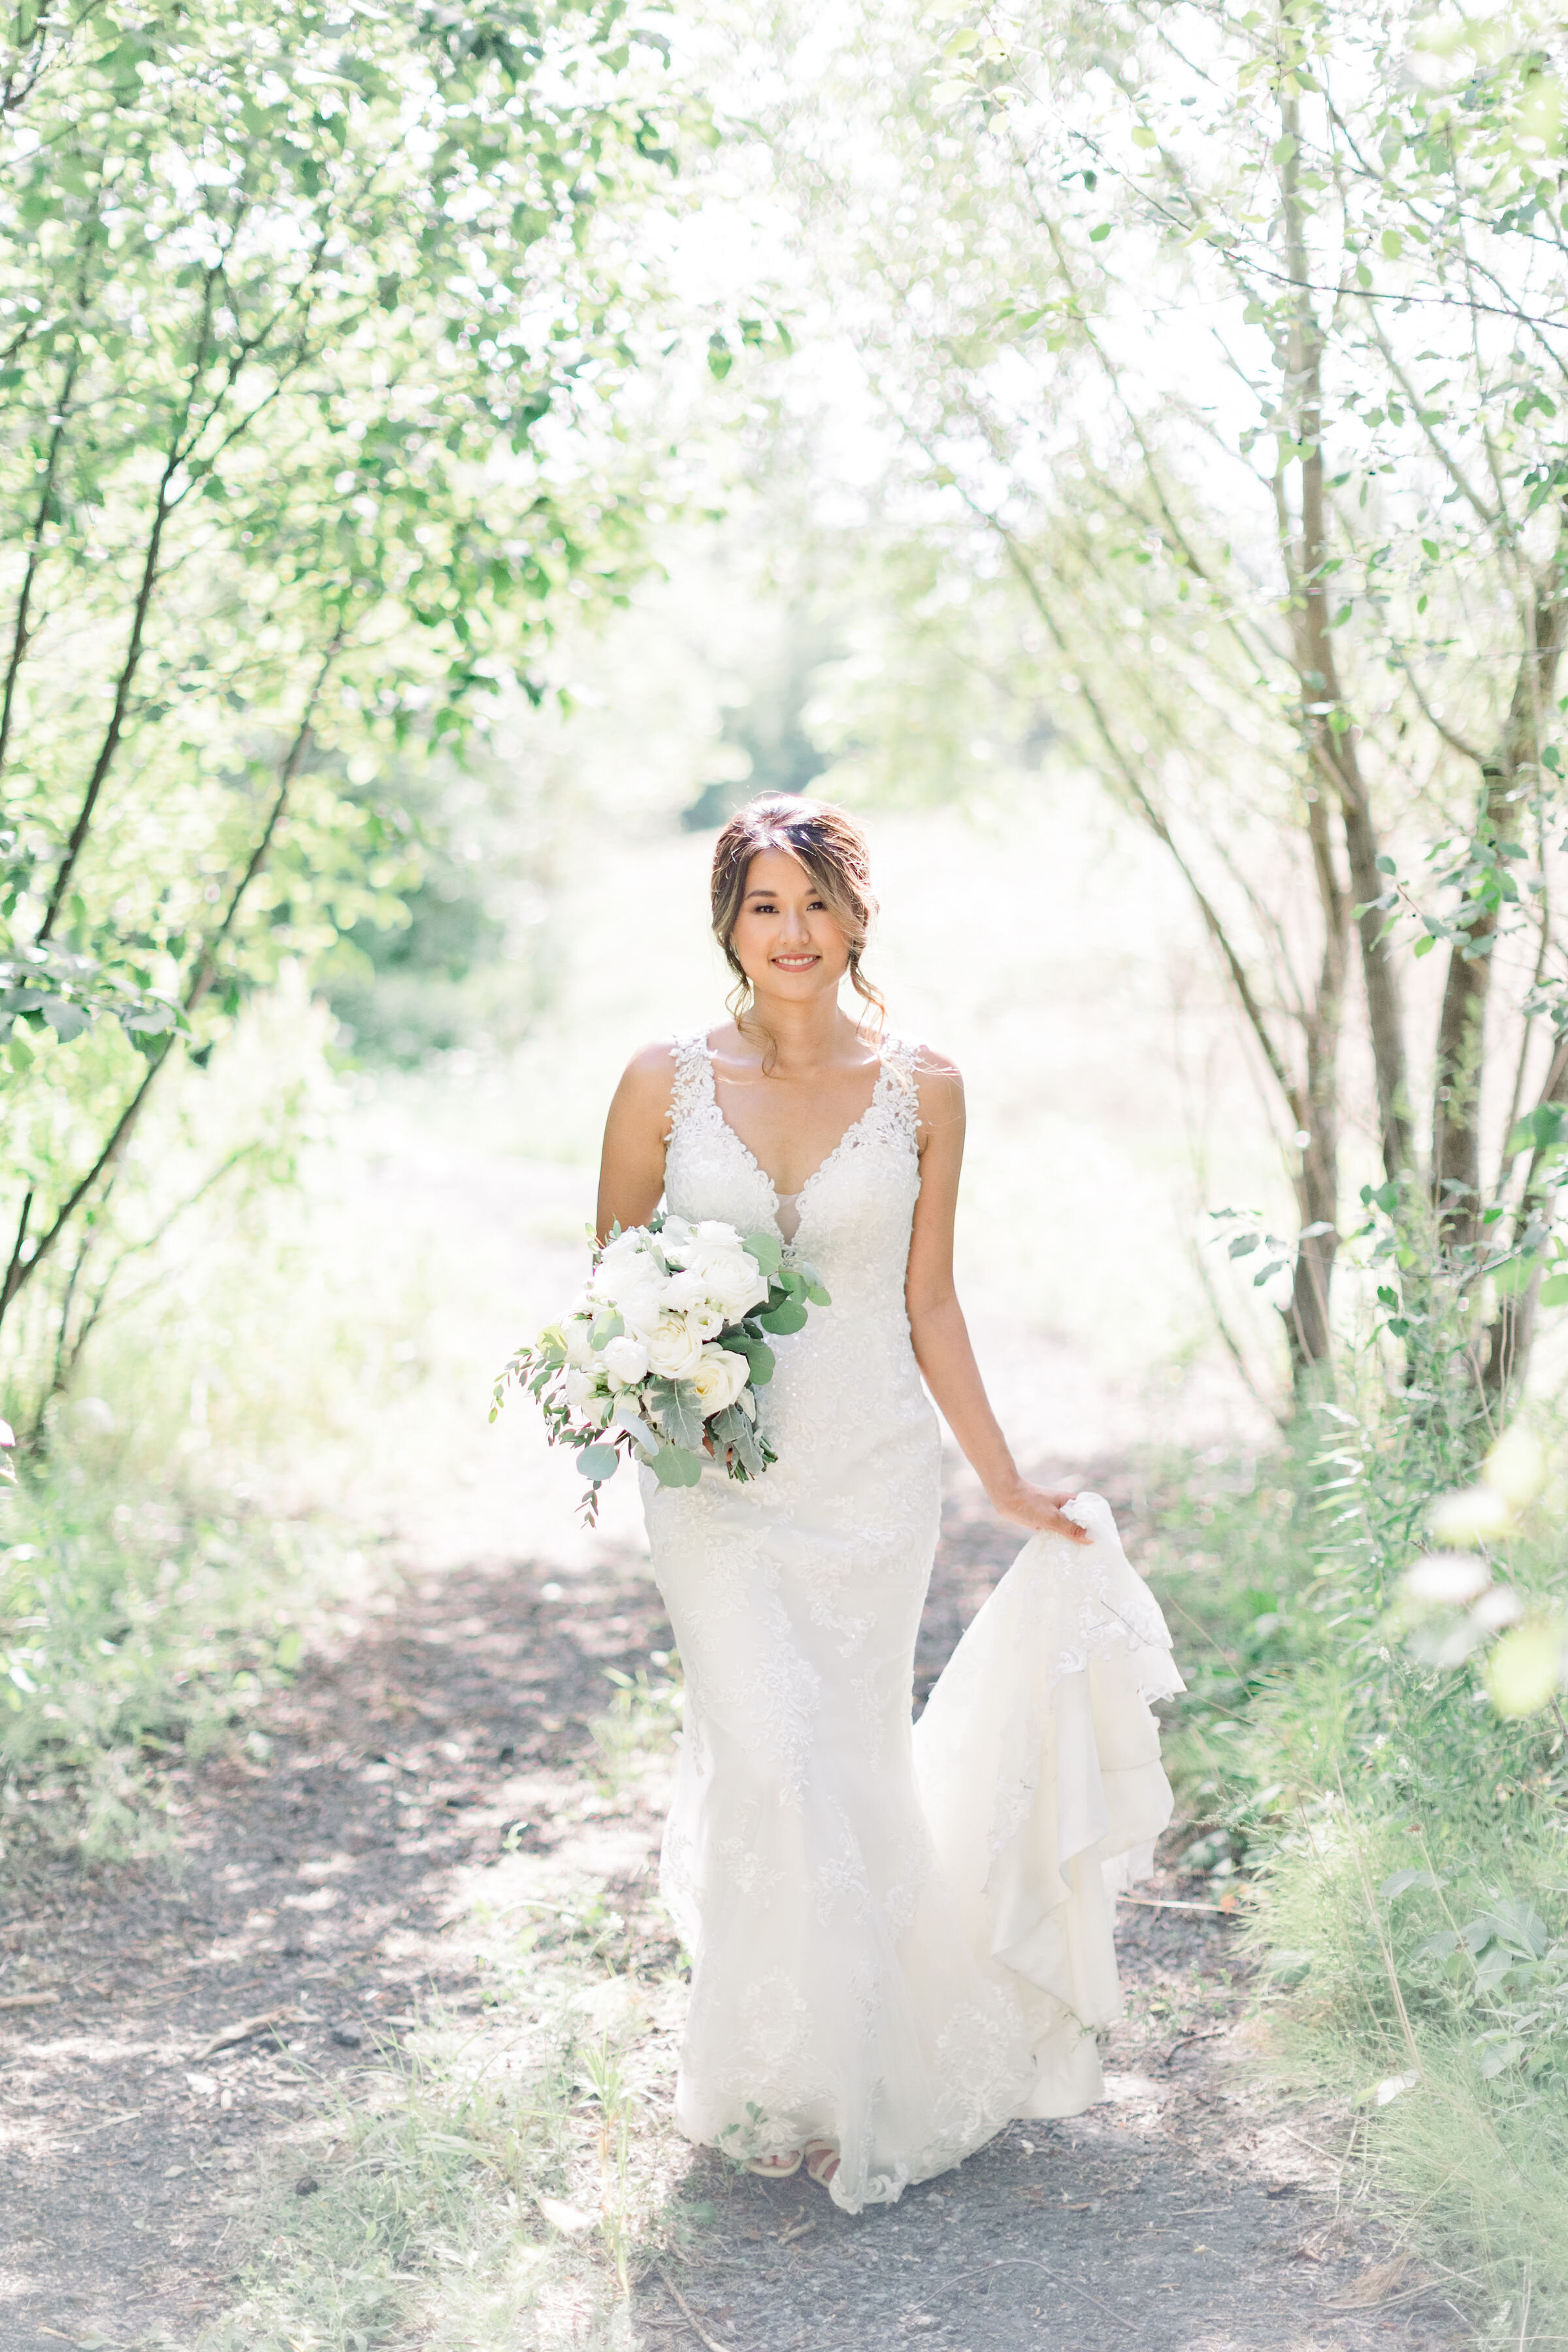  Beautiful bride with plunging neckline white lace dress and long train with white wedding bouquet in Ottawa, ON by Chelsea Mason Photography. vneck wedding dress low cut wedding dress plunging neckline wedding dress lace wedding dress lace wedding t